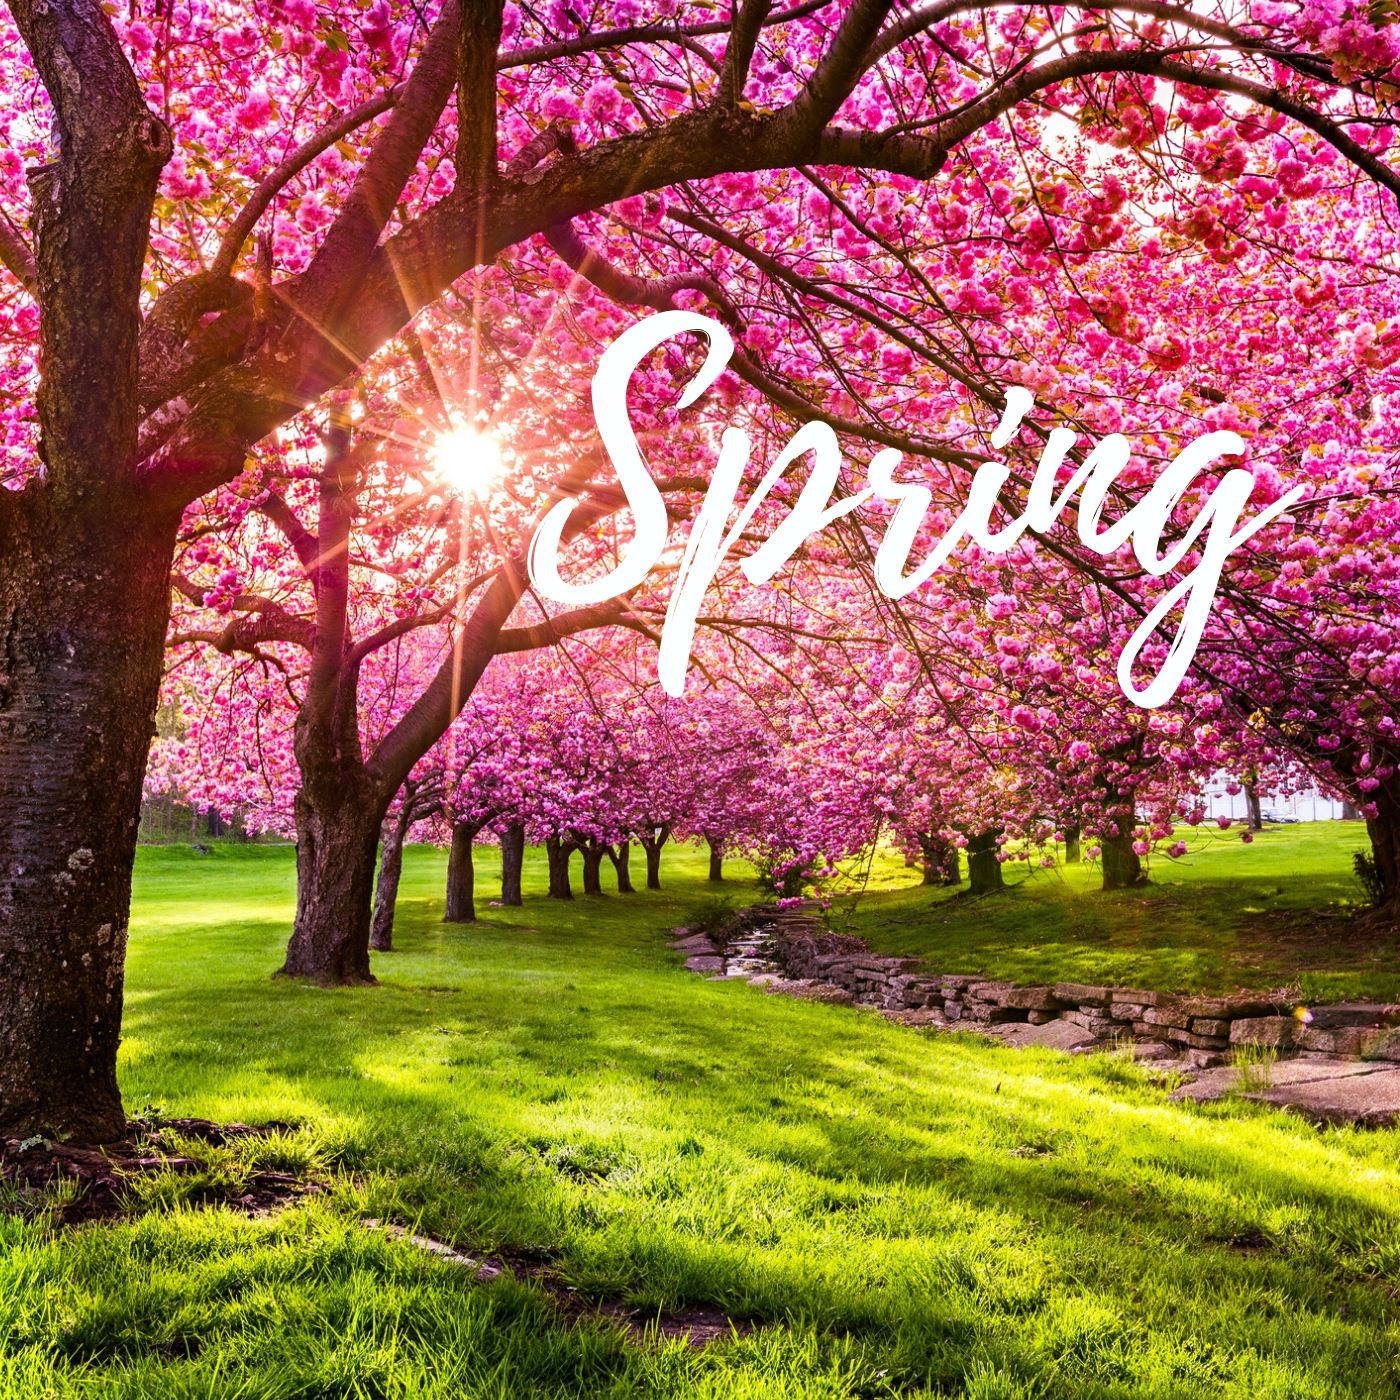 Classical Music for Spring